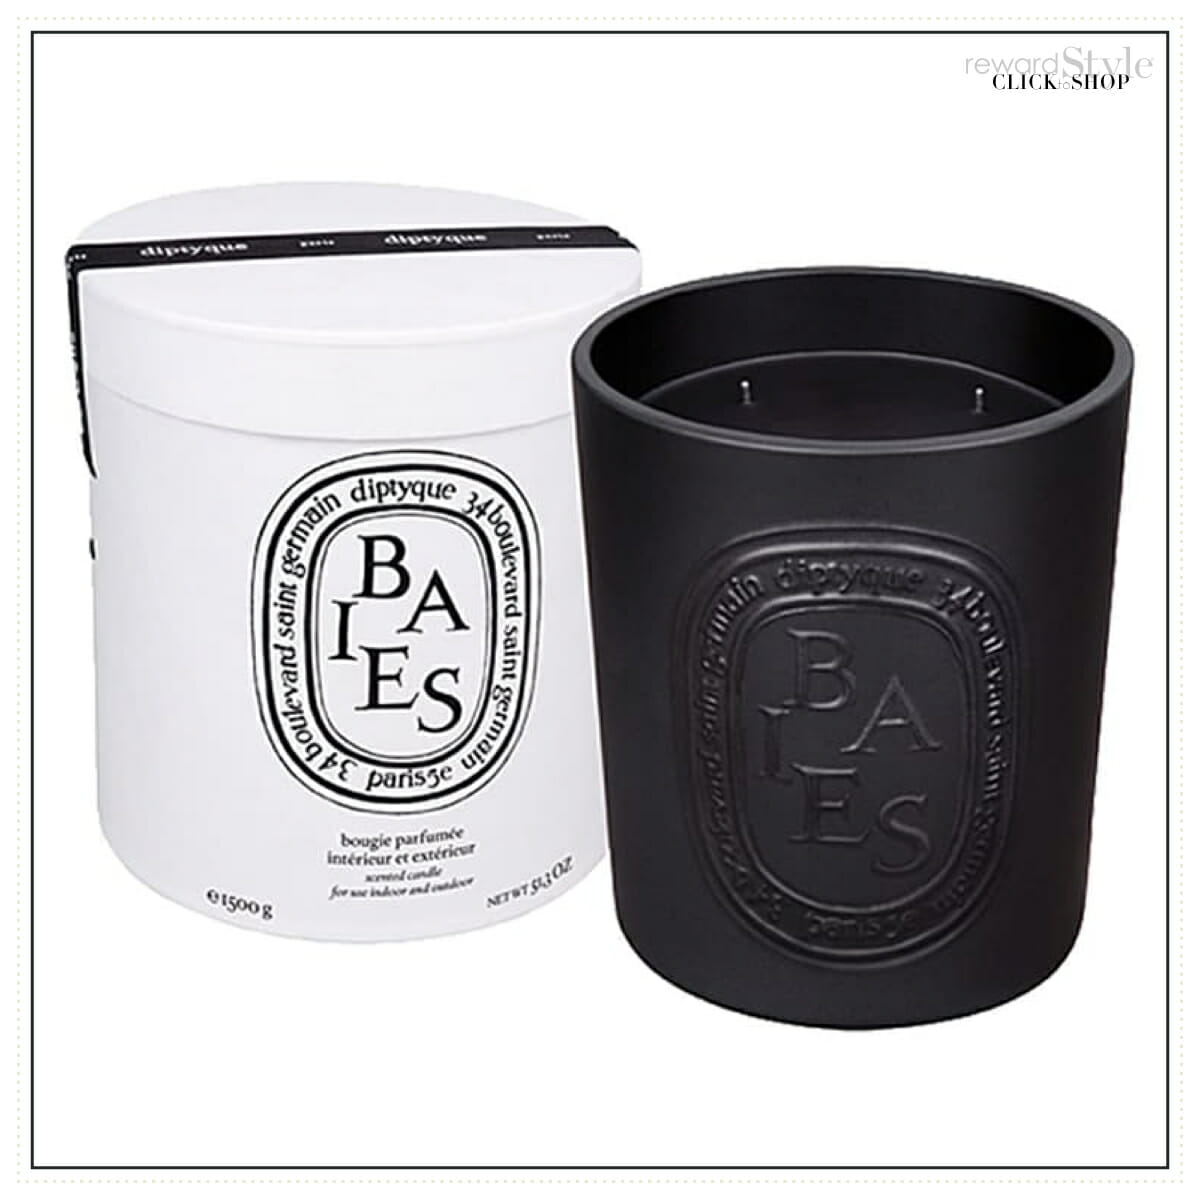 Diptyque luxury home fragrance